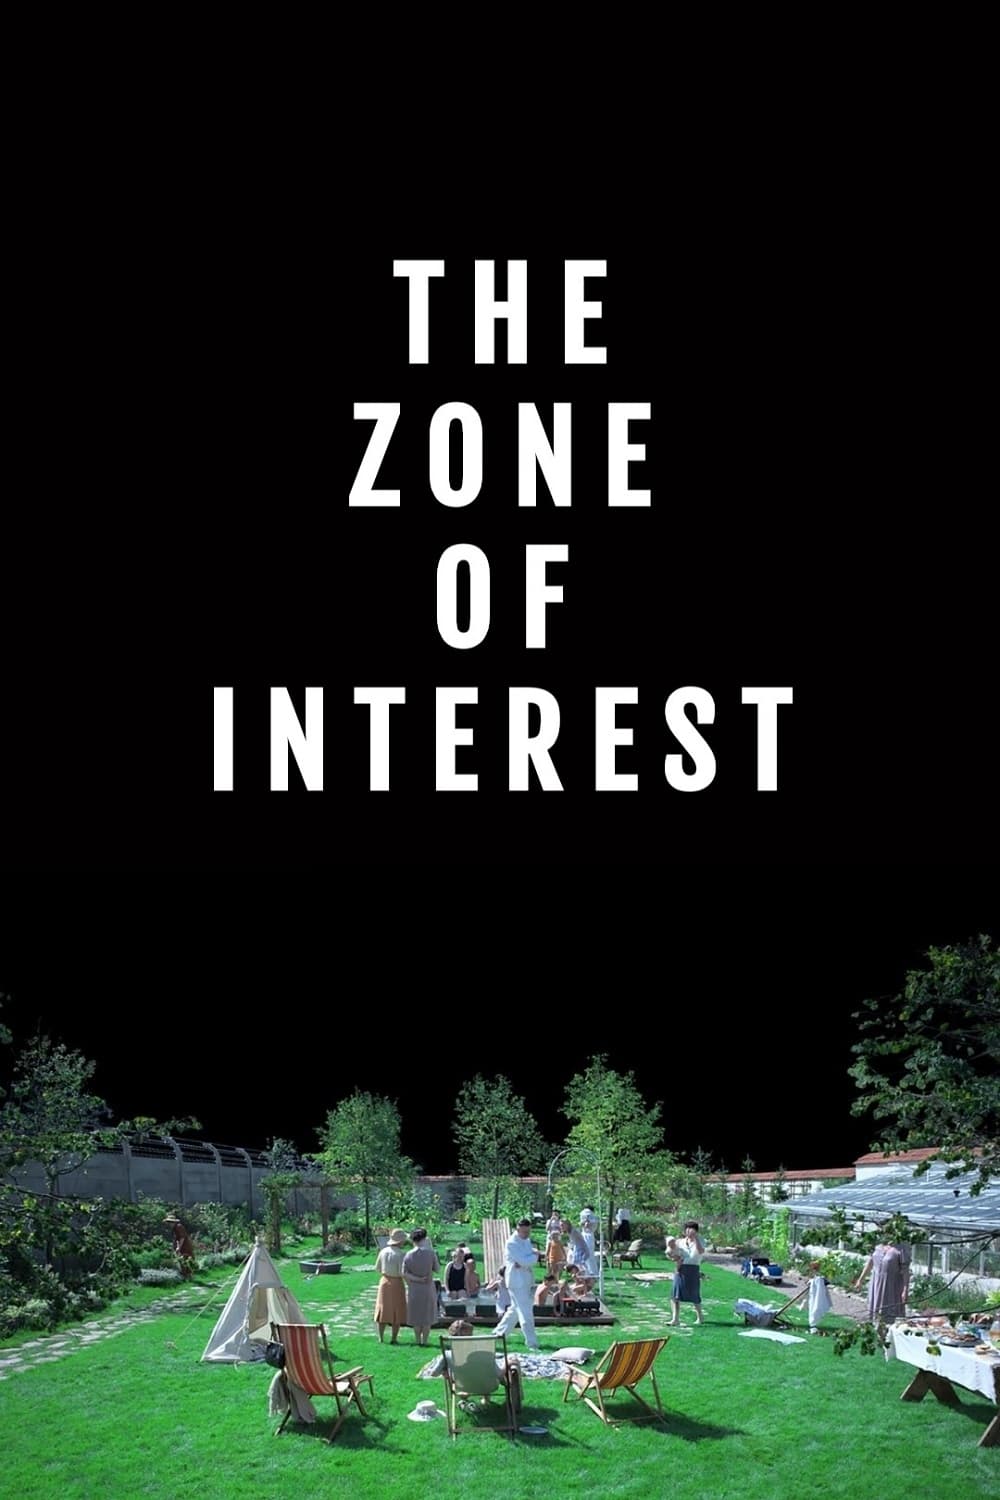 “The Zone of Interest” by James Wilson, Producer